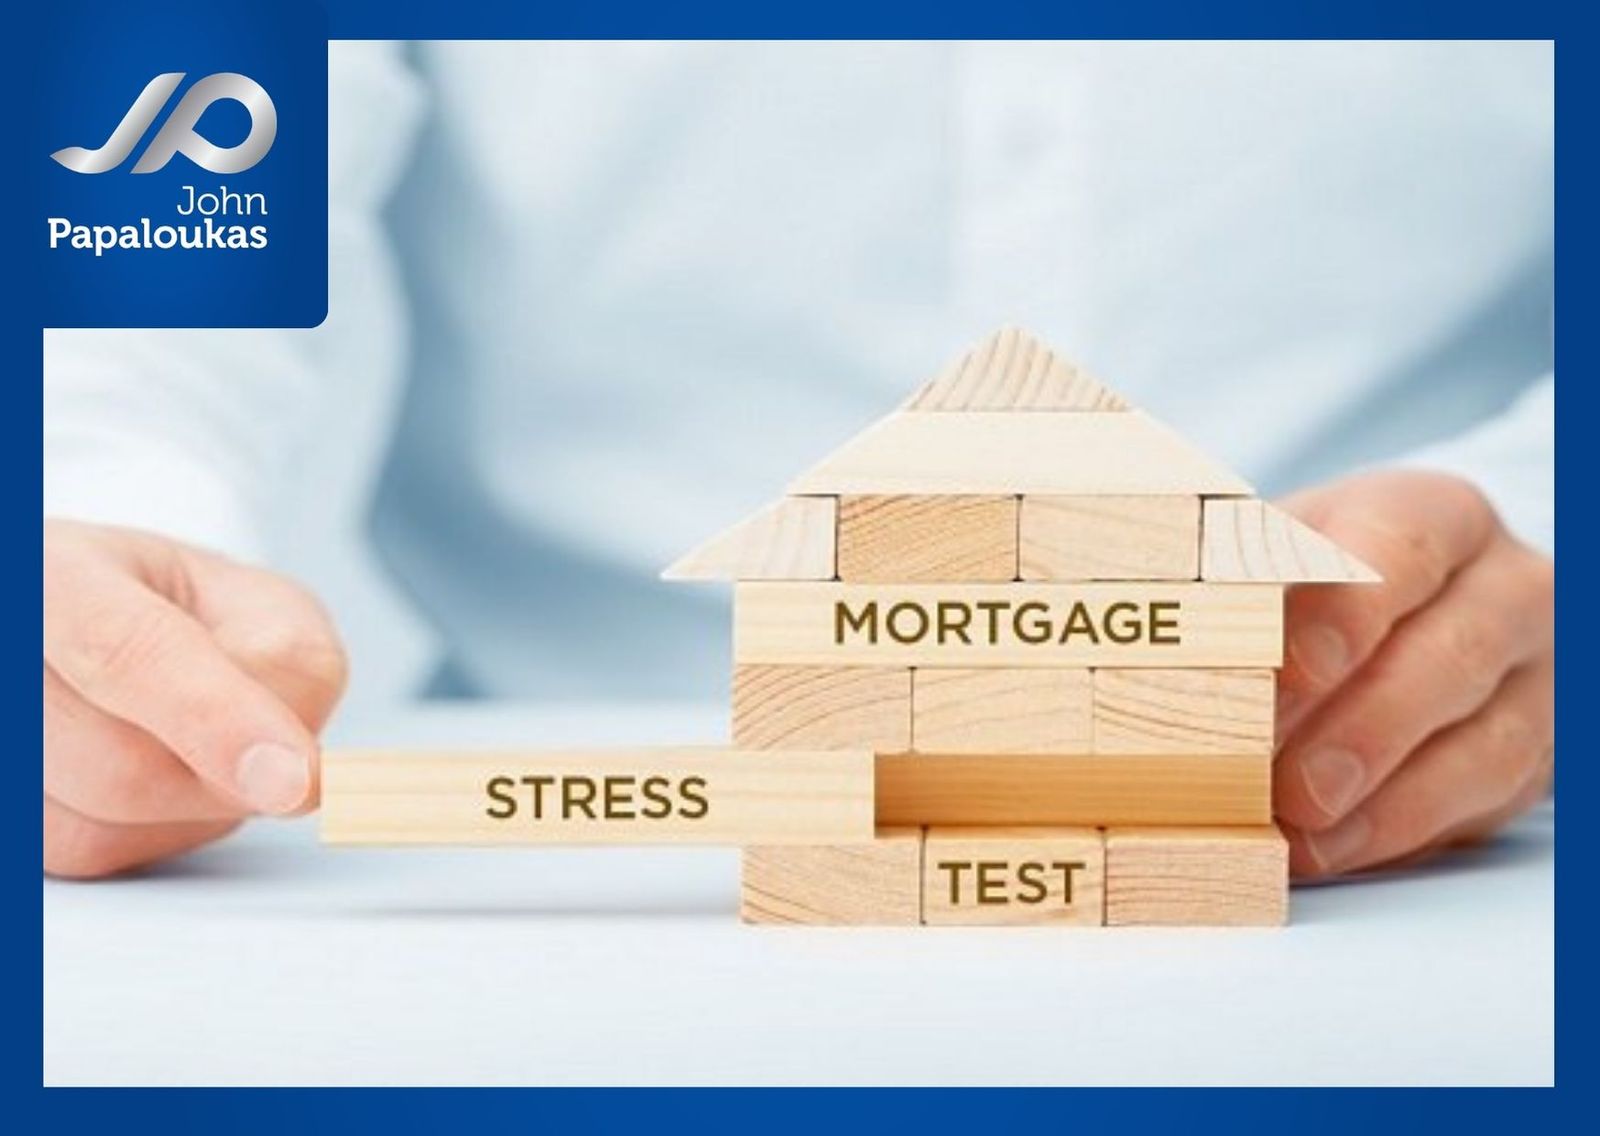 New Mortgage Stress Test now applies to ALL borrowers